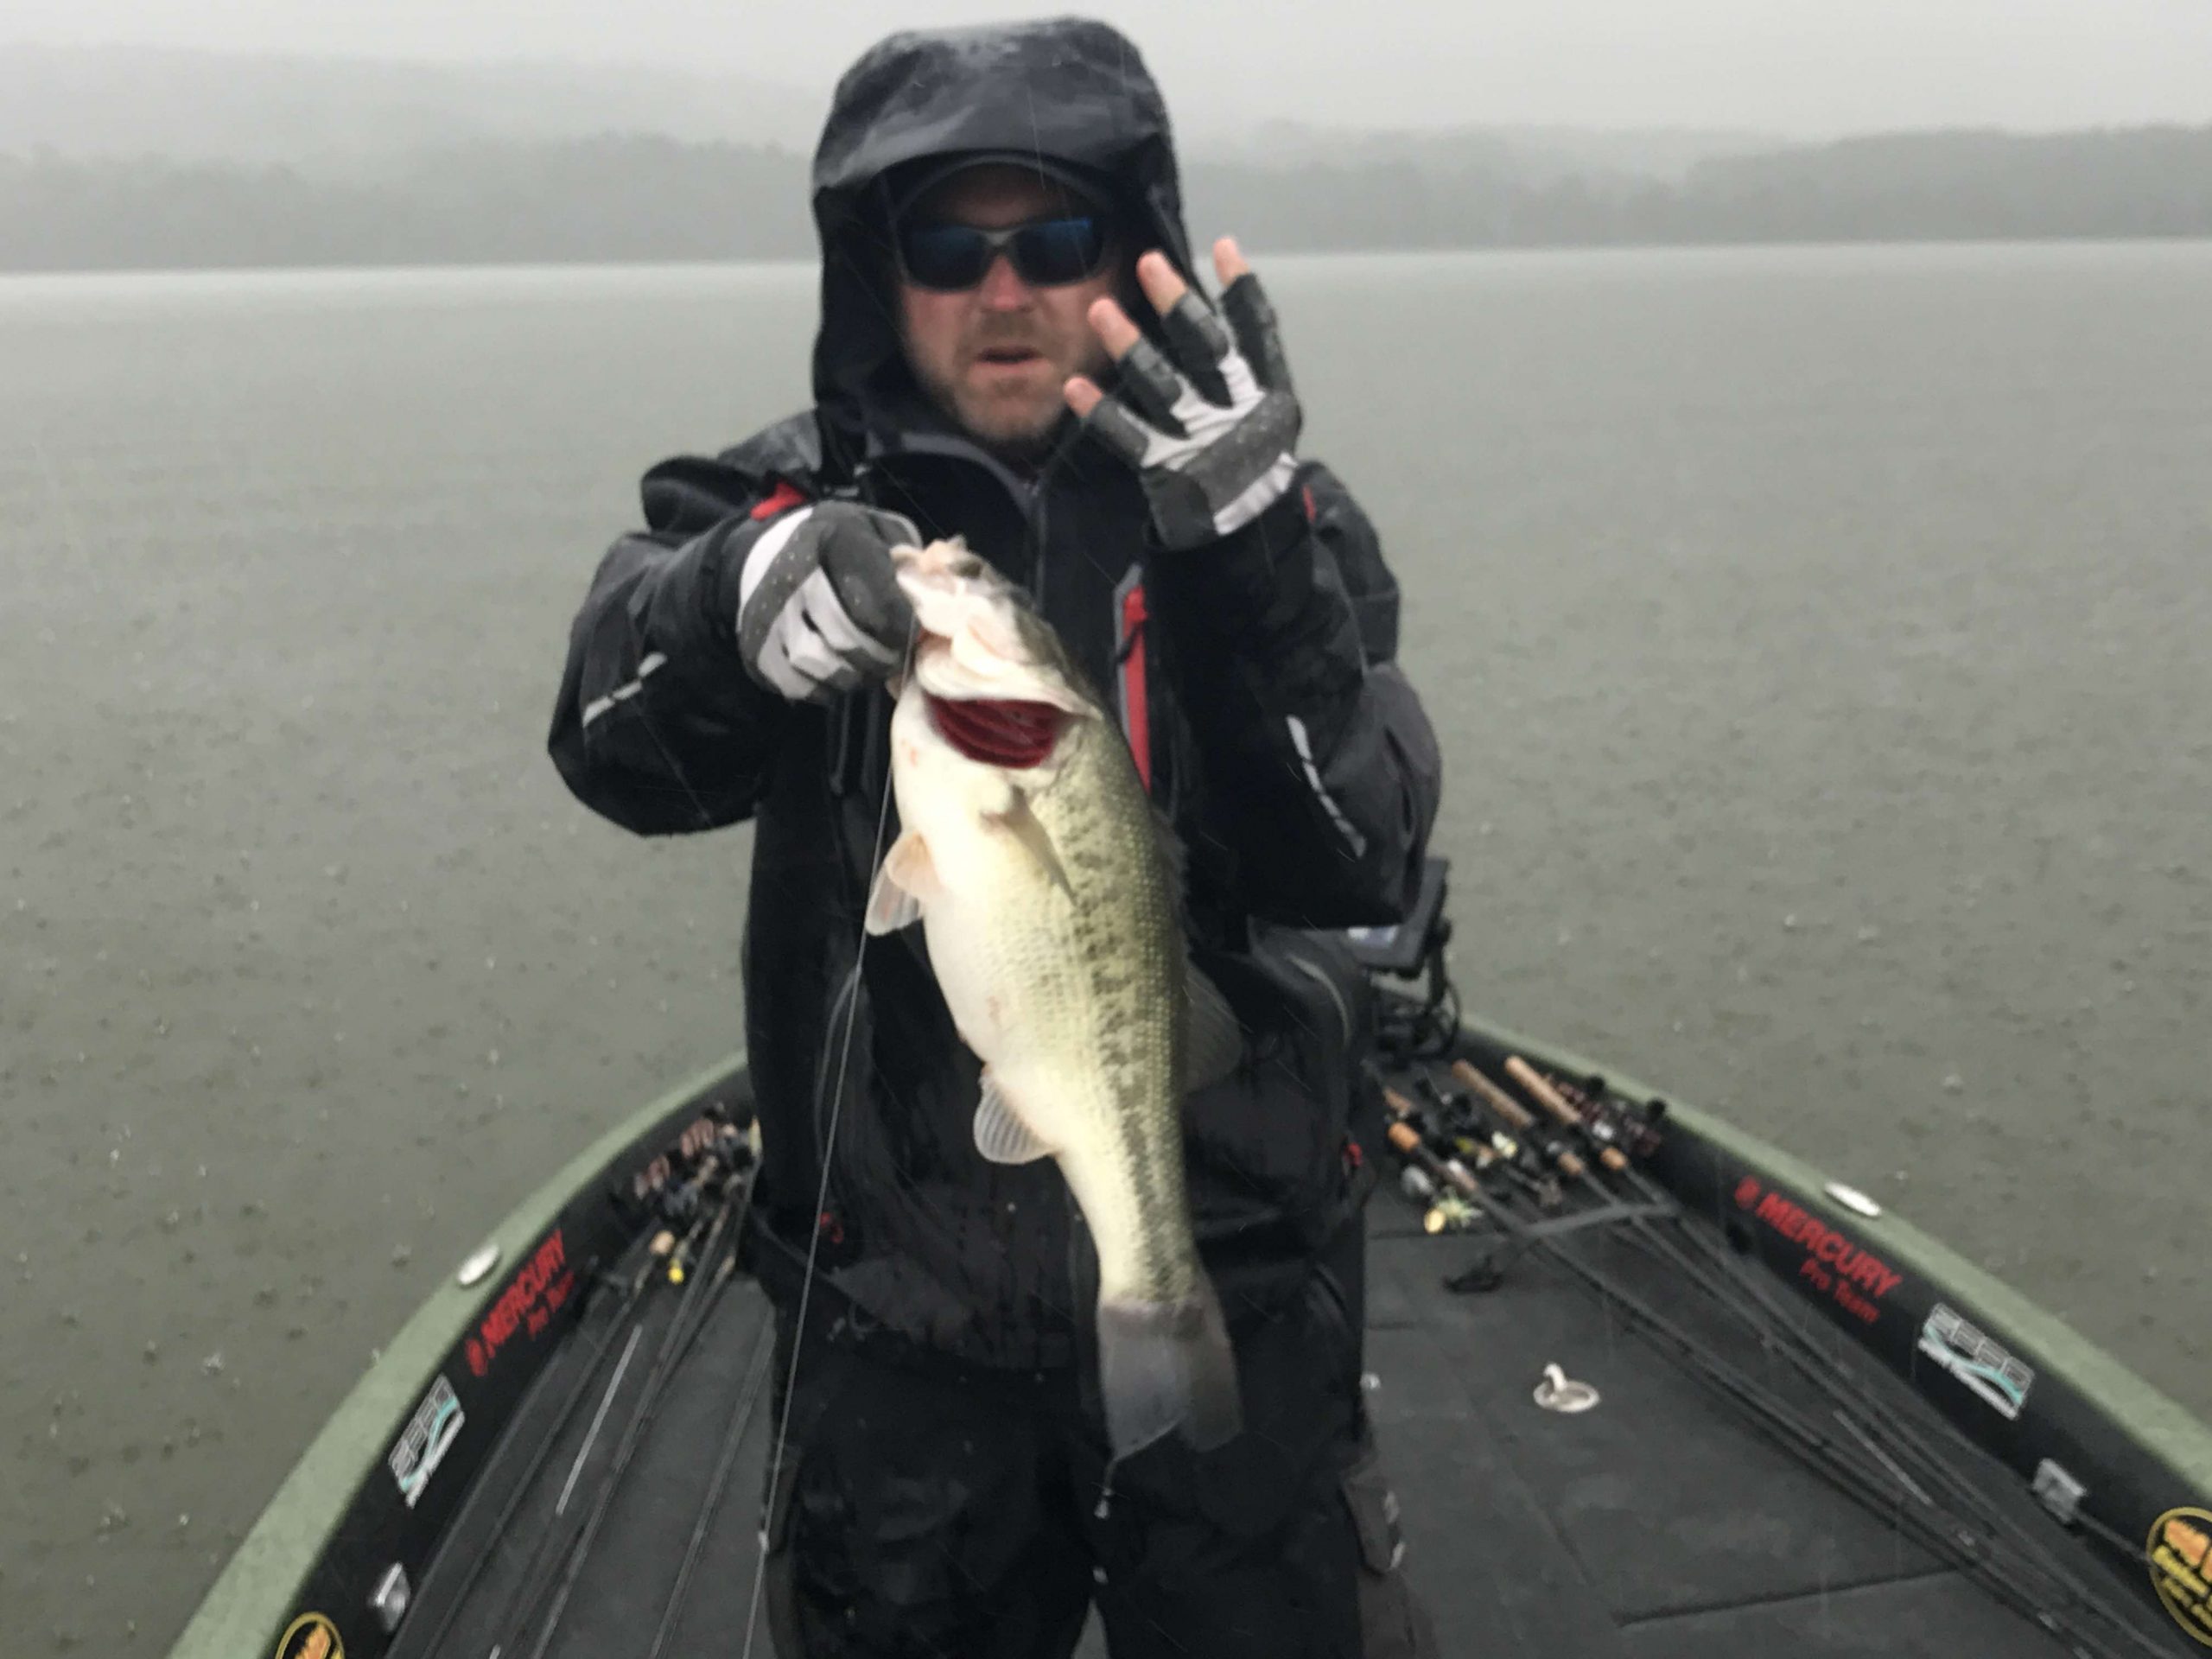 In a downpour, Mike McClellan boats a hard earned four pounder.